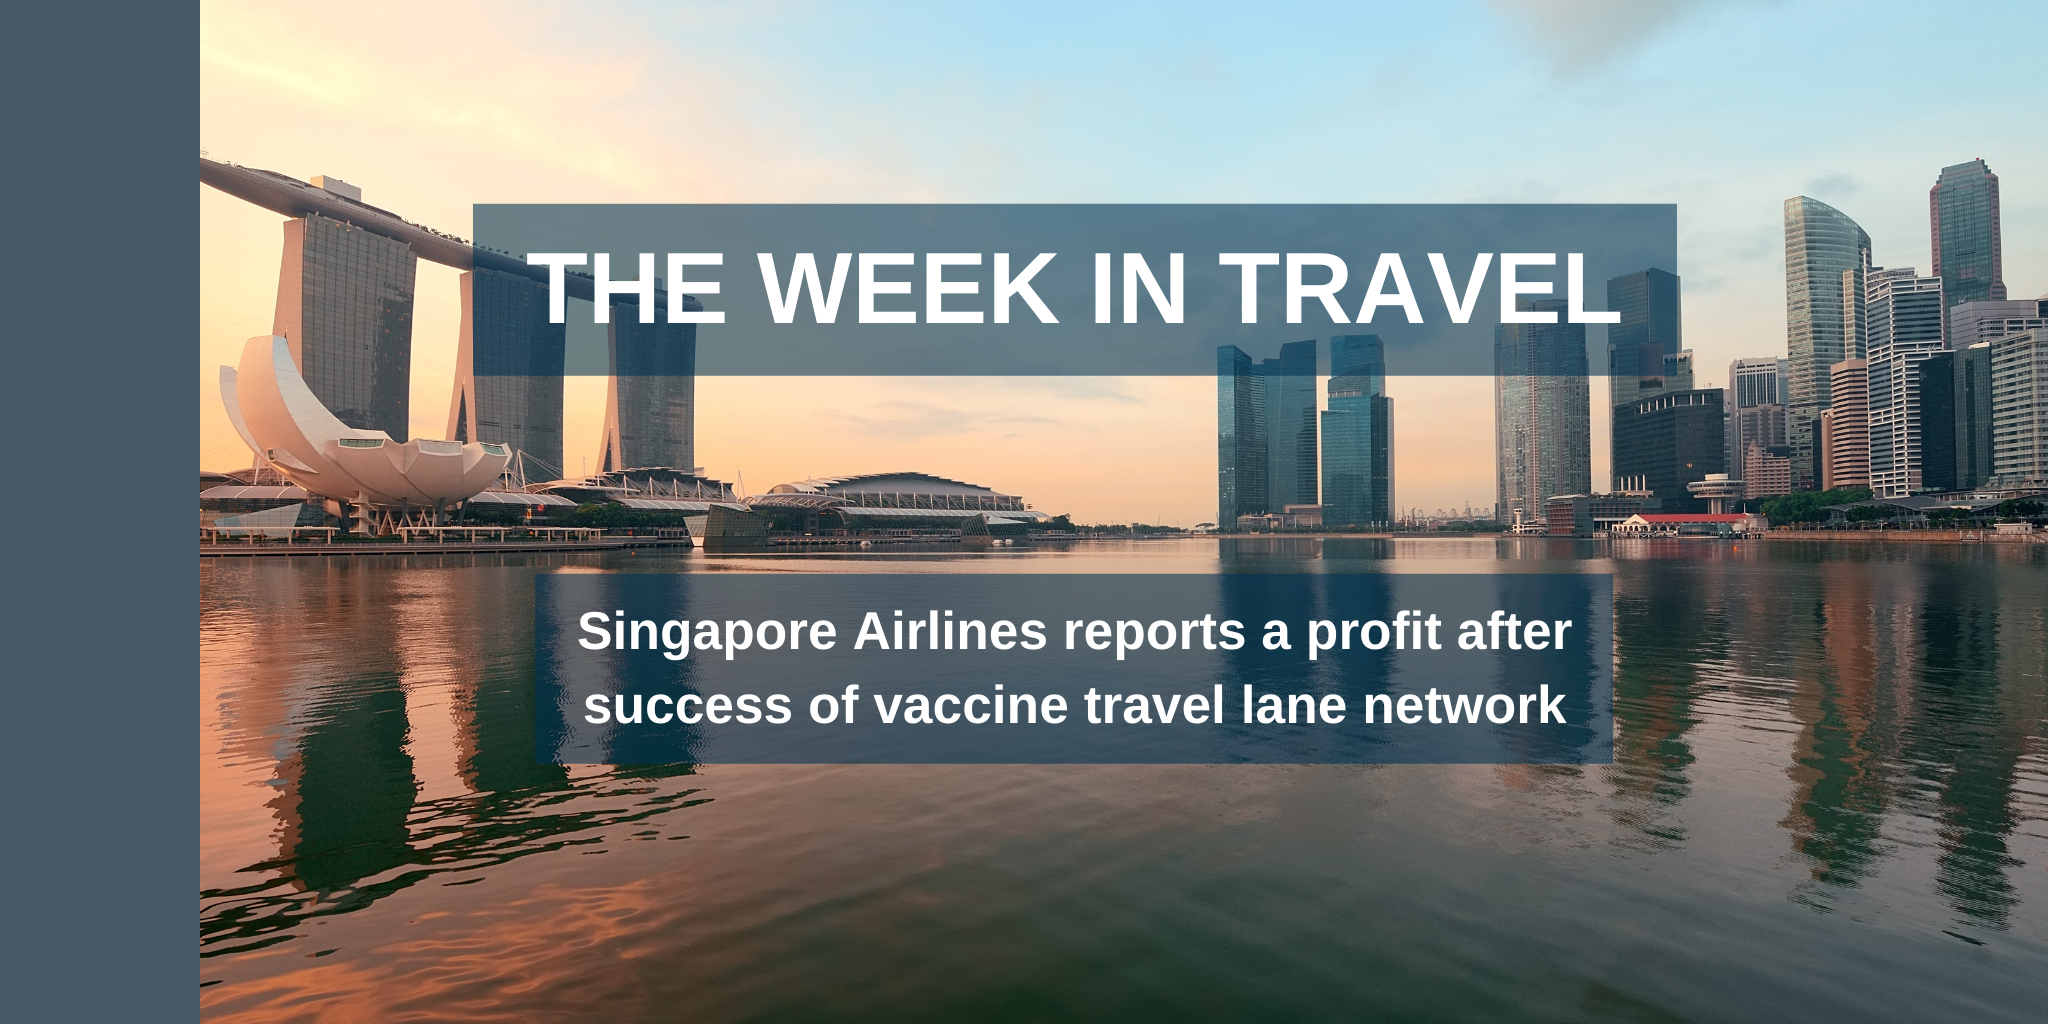 The Week in Travel 25th February 2022